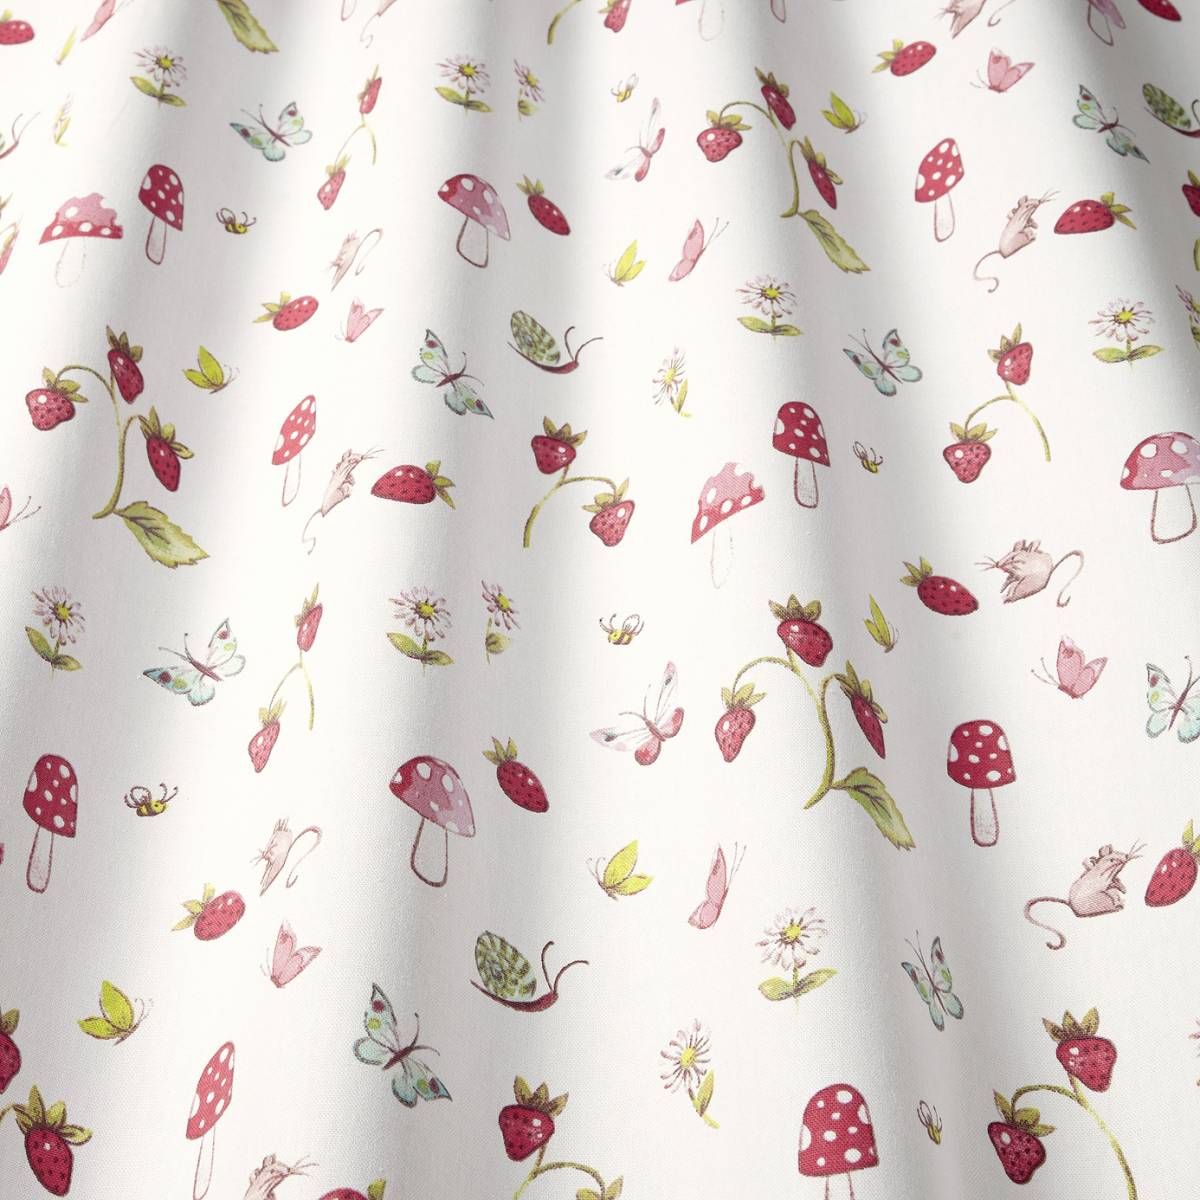 Toadstools Fabric - Pink (TOADSTOOLS) - iLiv Fairytale Fabrics Collection